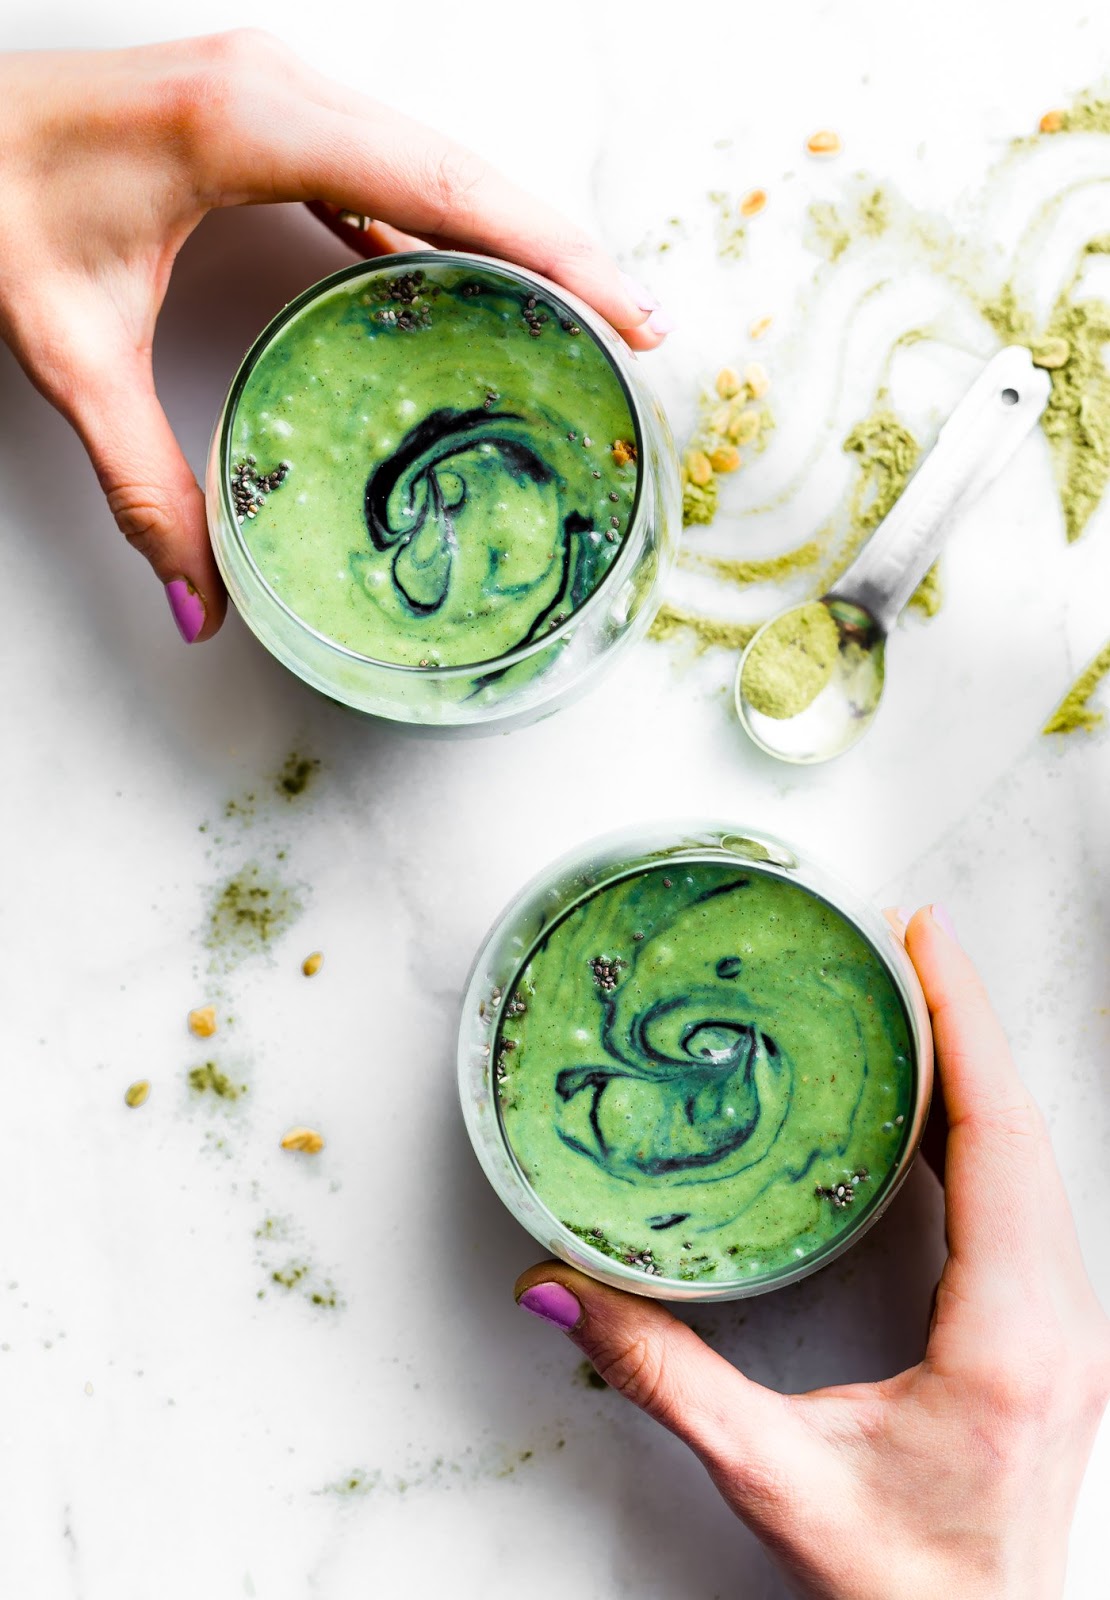 Spirulina Smoothies - 16 HEALING RECIPES to create your nourishing MEAL PLAN. This recipe round up is full of AIP friendly, Paleo anti-inflammatory, and/or Whole 30 compliant recipes for breakfast, lunch, dinner, and more!